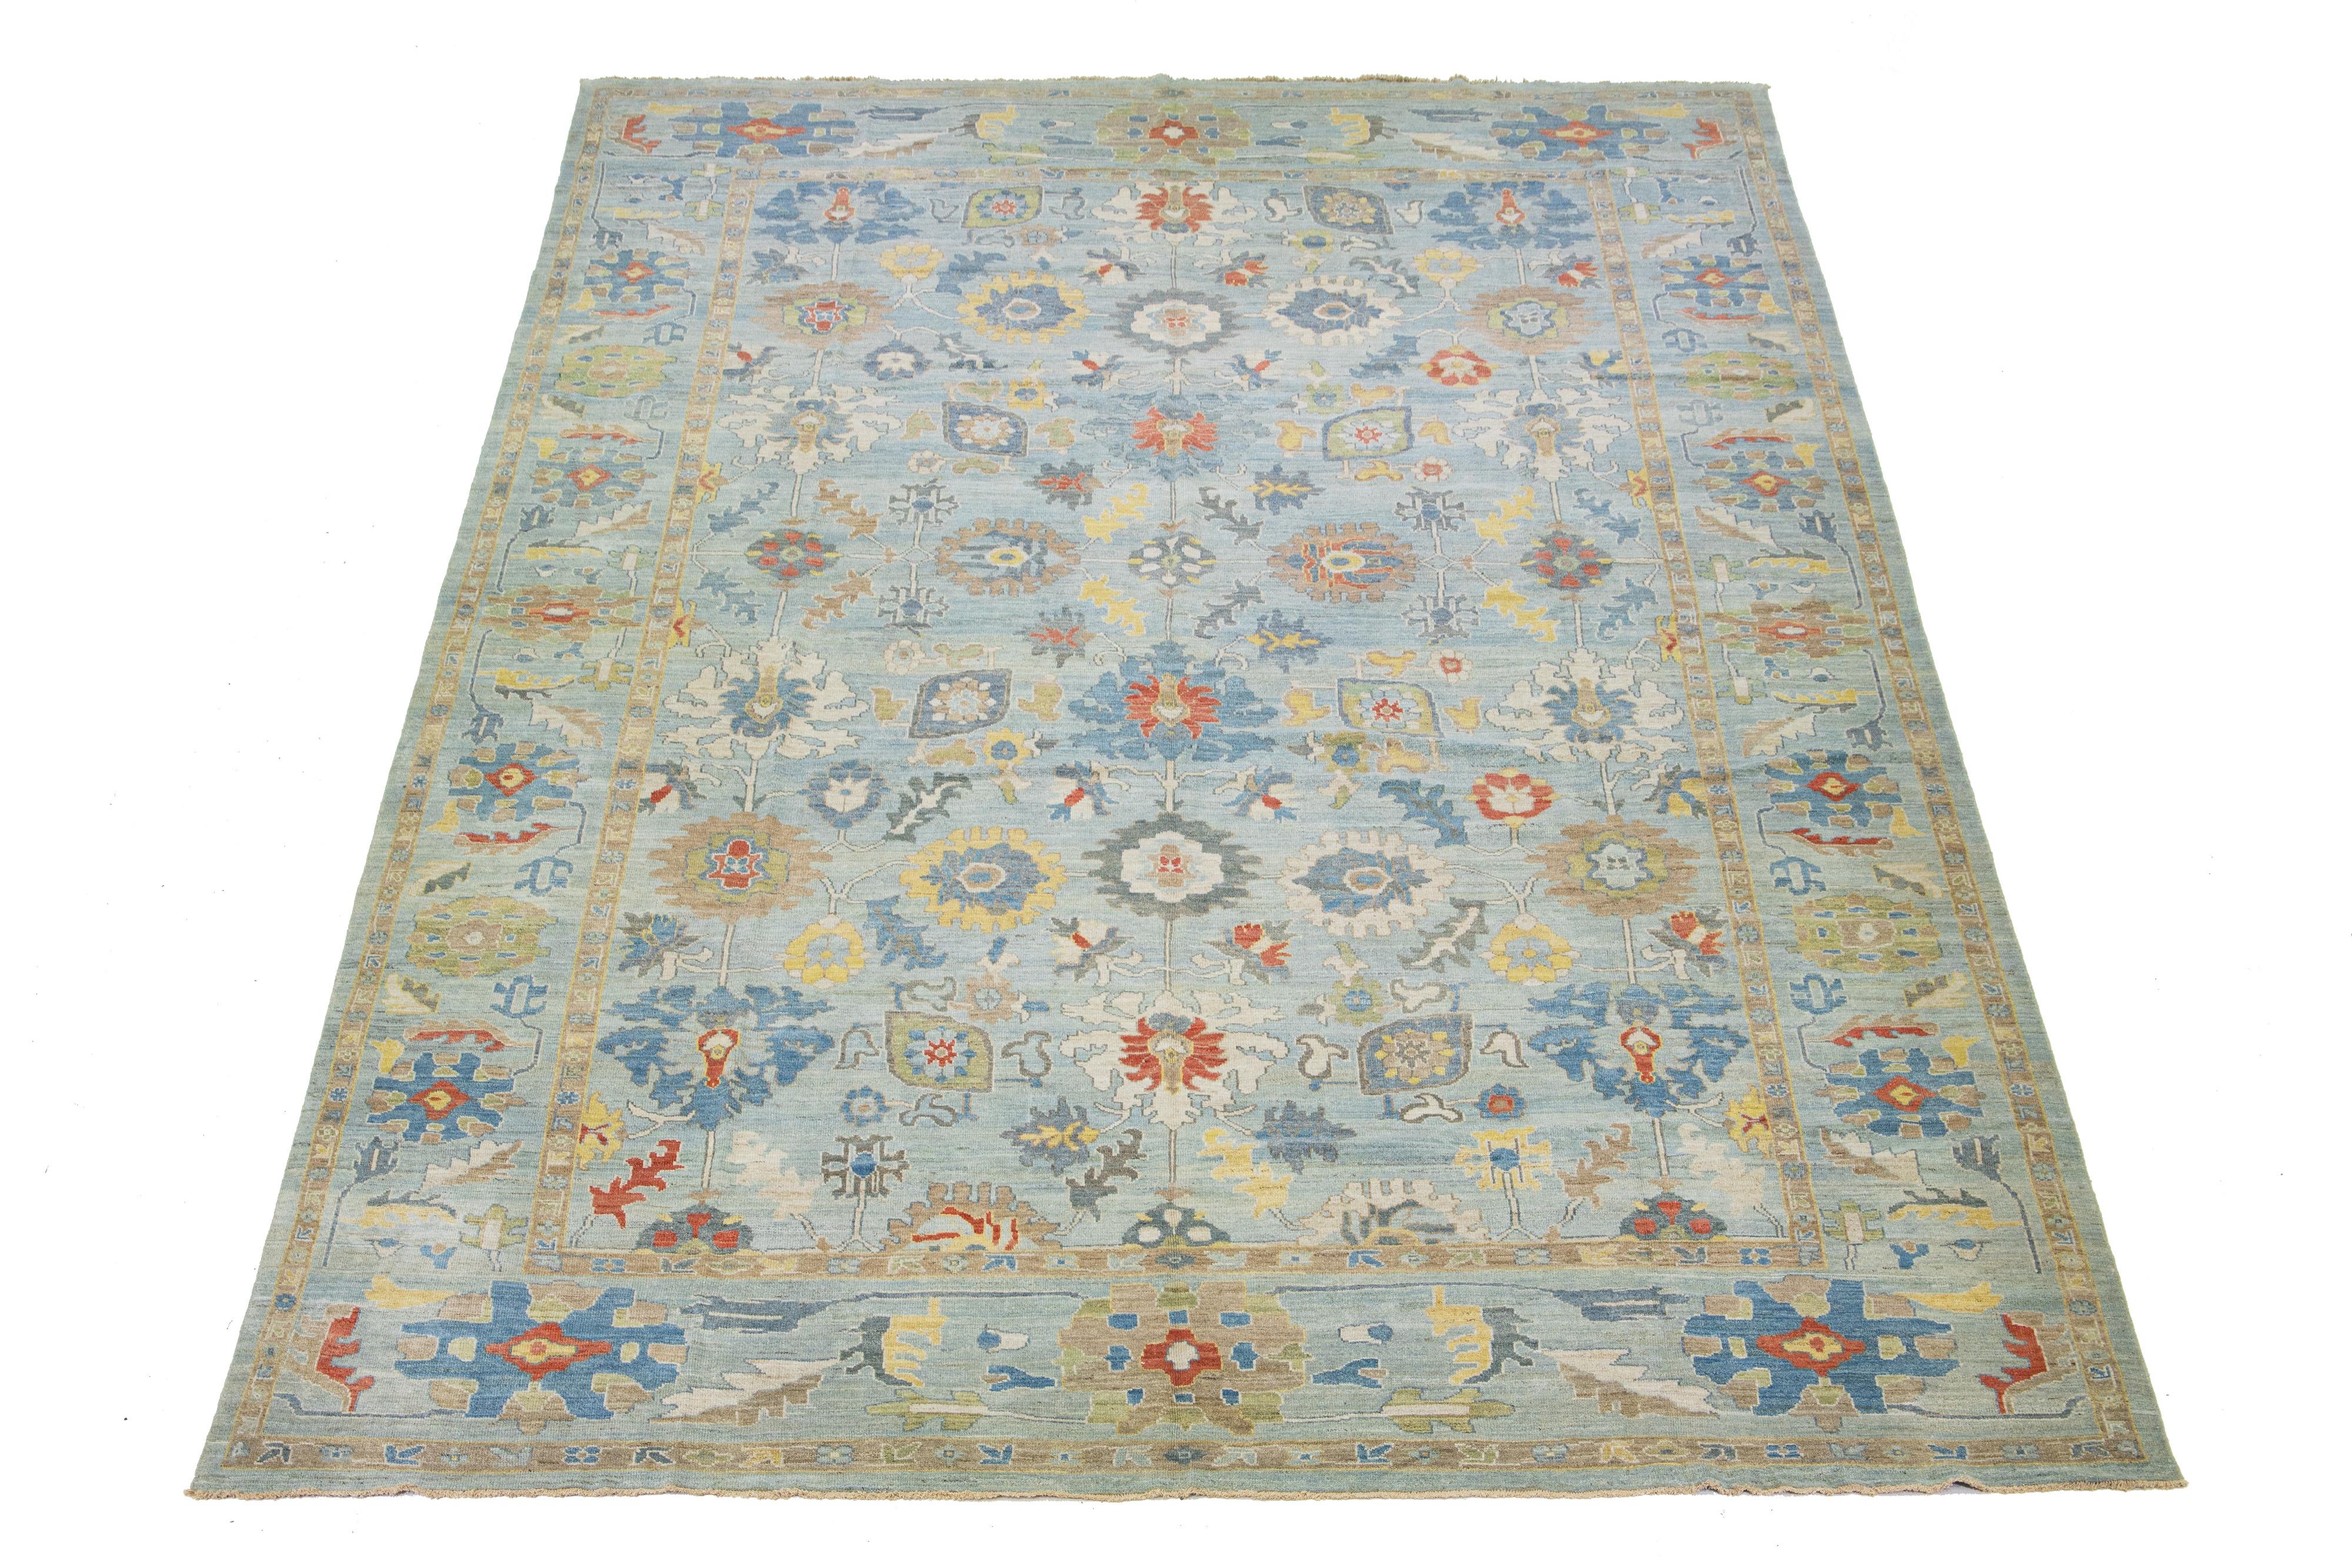 Beautiful Oversized modern Sultanabad hand-knotted wool rug with a blue field. This Sultanabad rug has = multicolor accents in a gorgeous classic floral pattern.

This rug measures 13'4